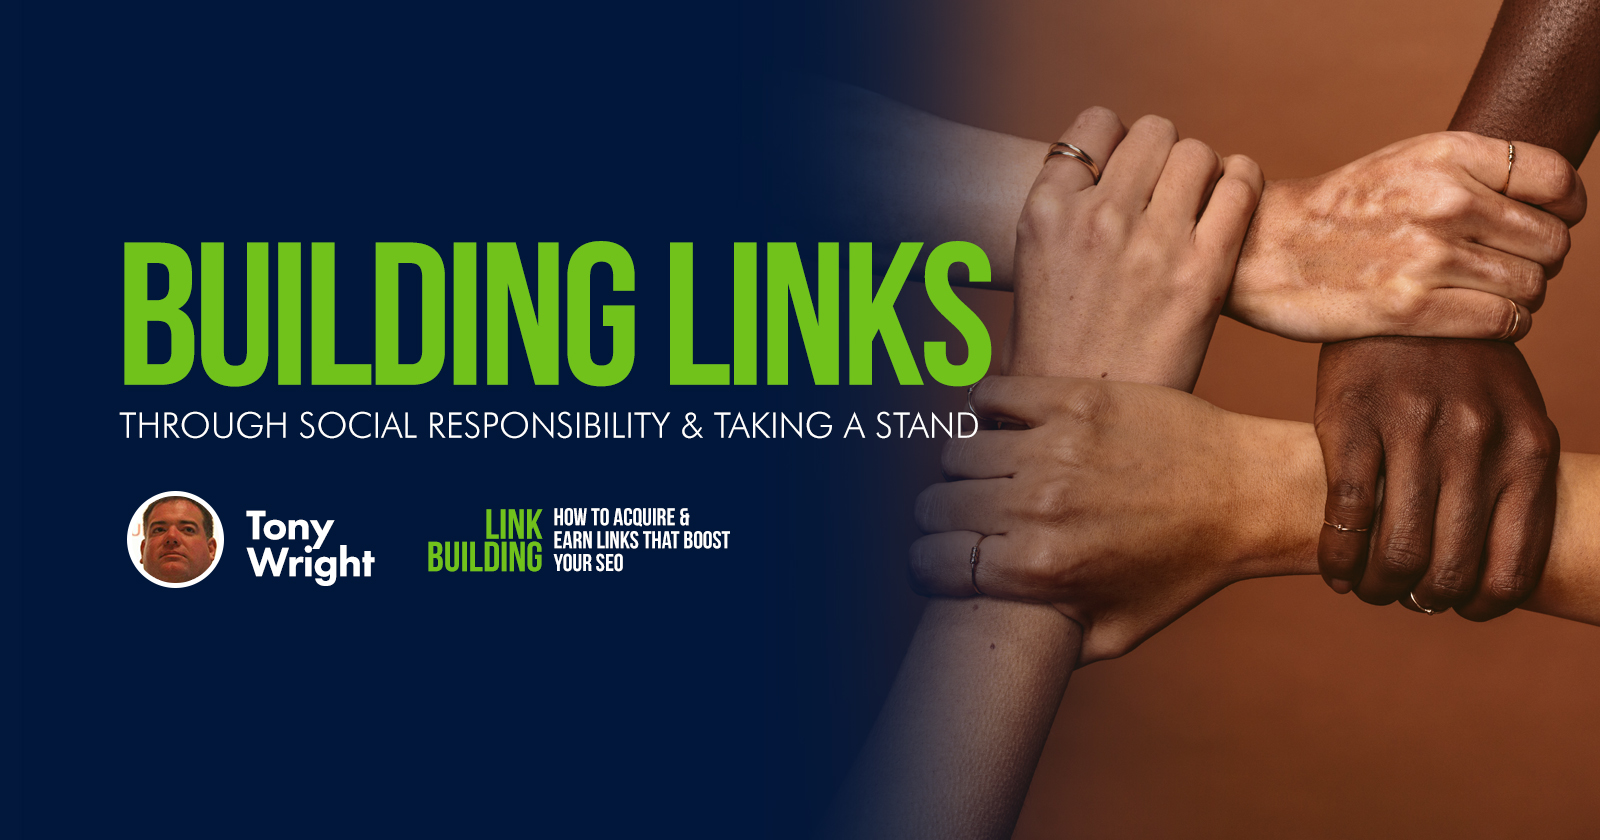 Building Links Through Social Responsibility & Taking a Stand